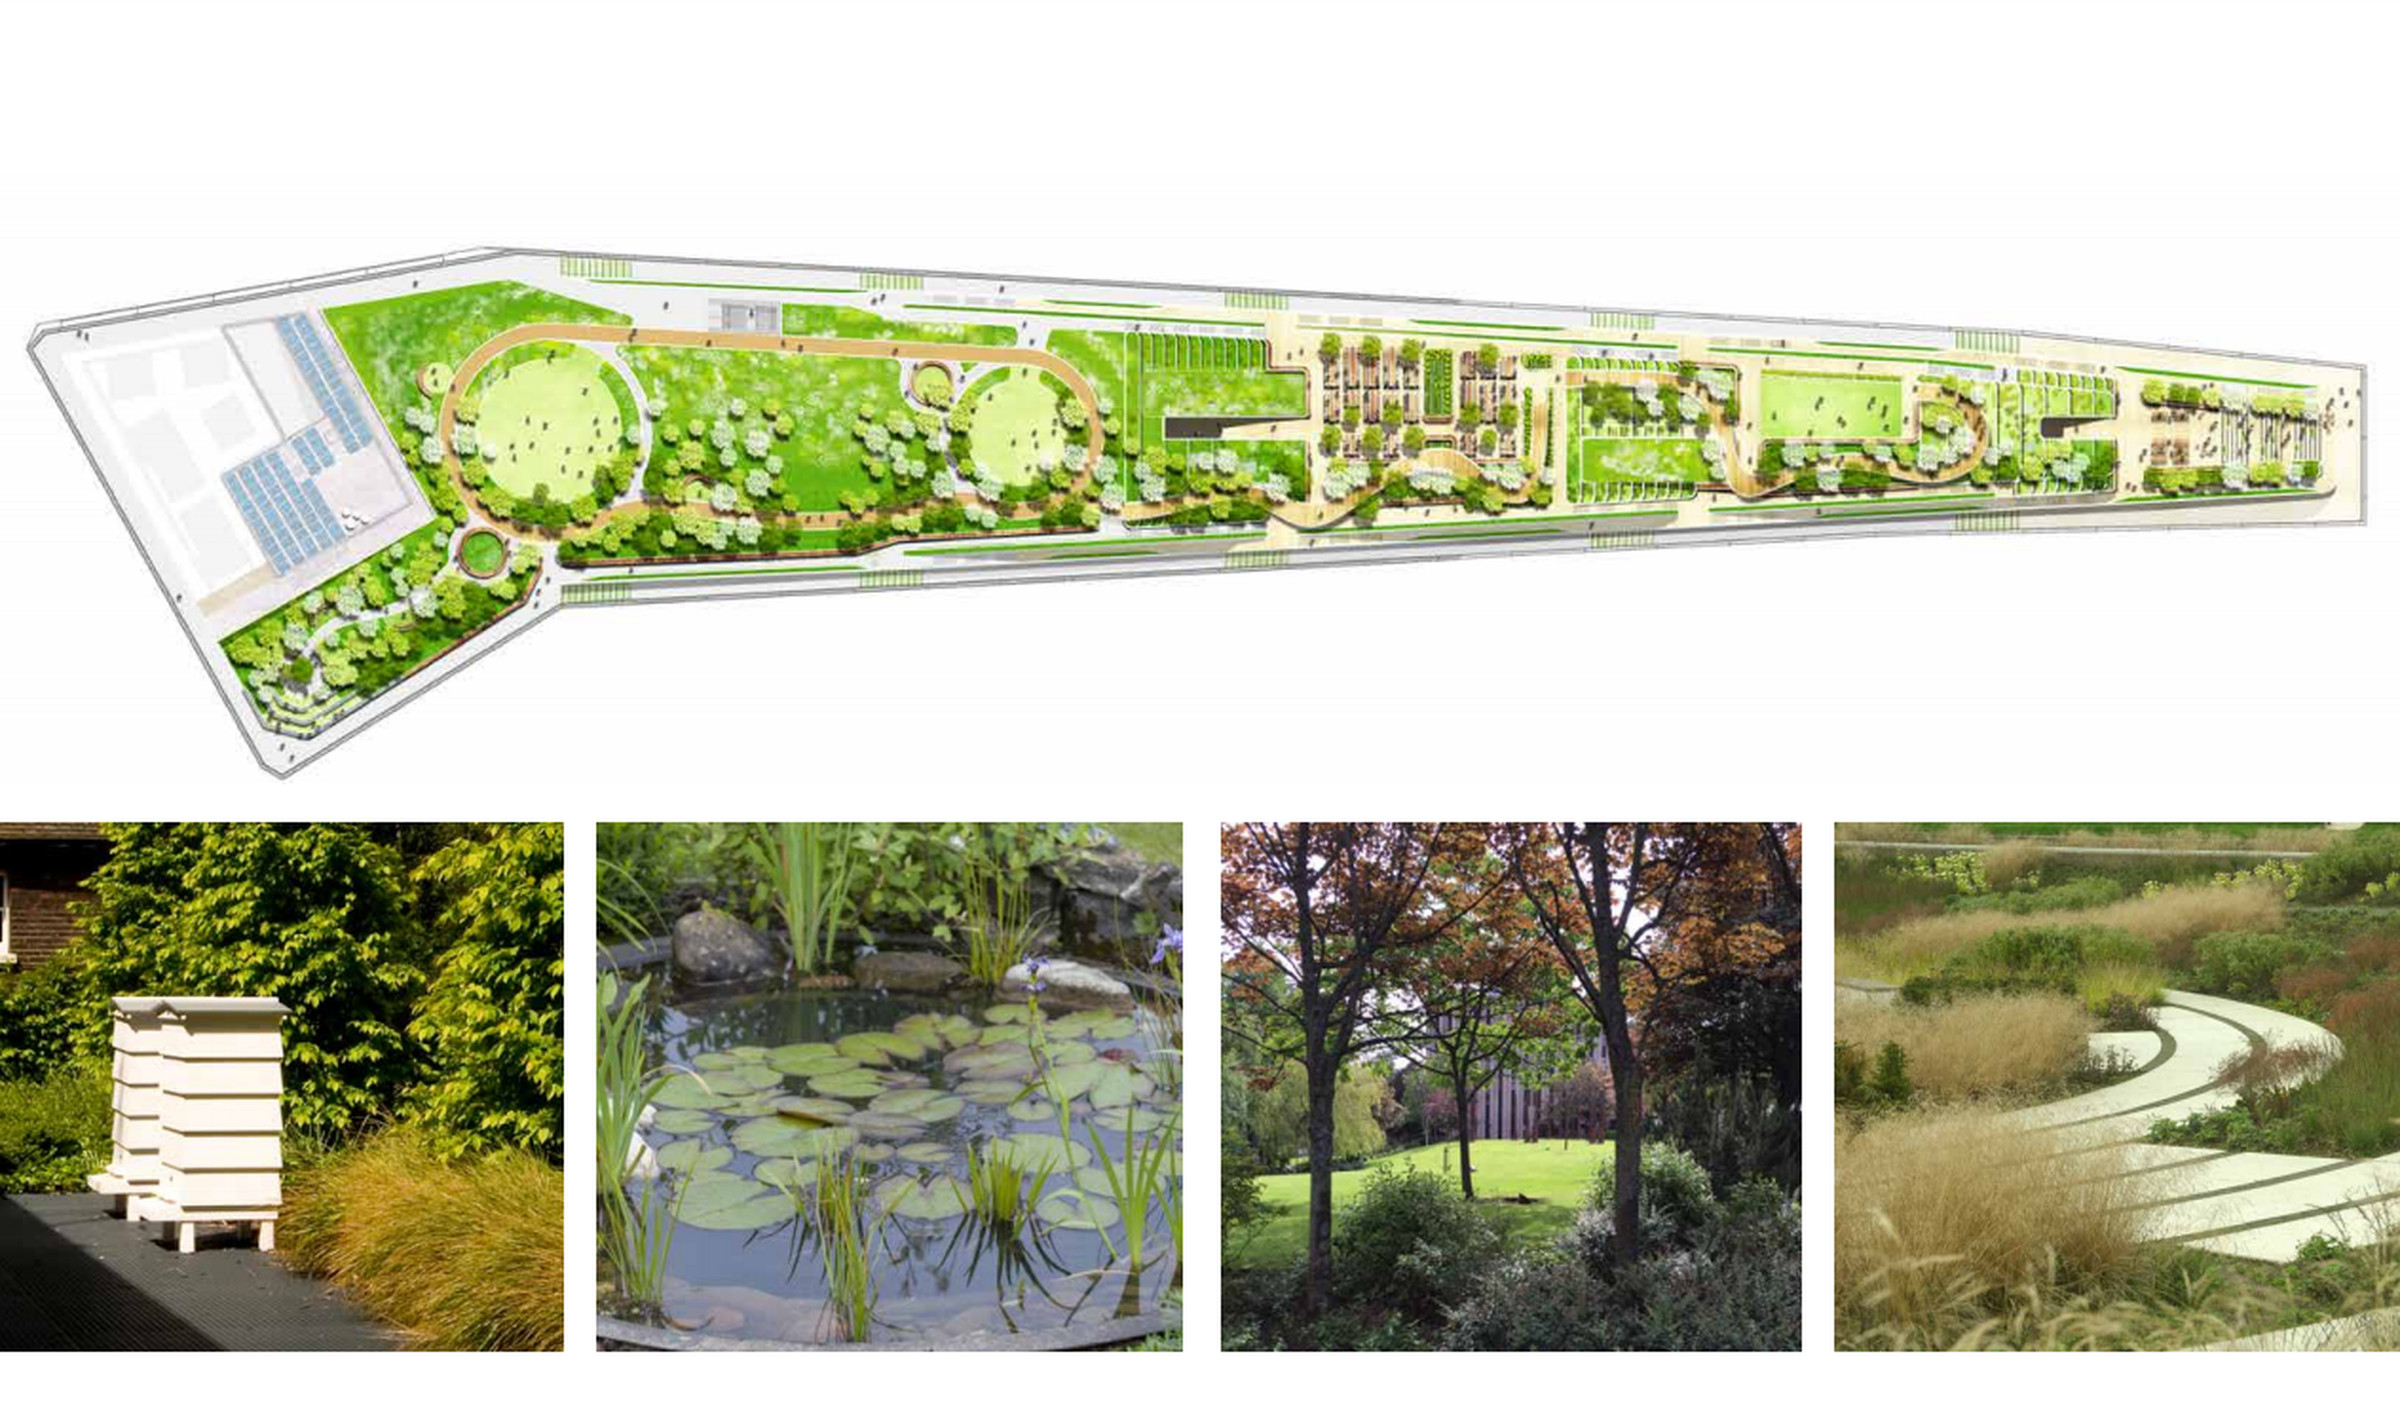 A plan for the garden shows it’s split into a number of different zones, and includes a 200-meter running trail.